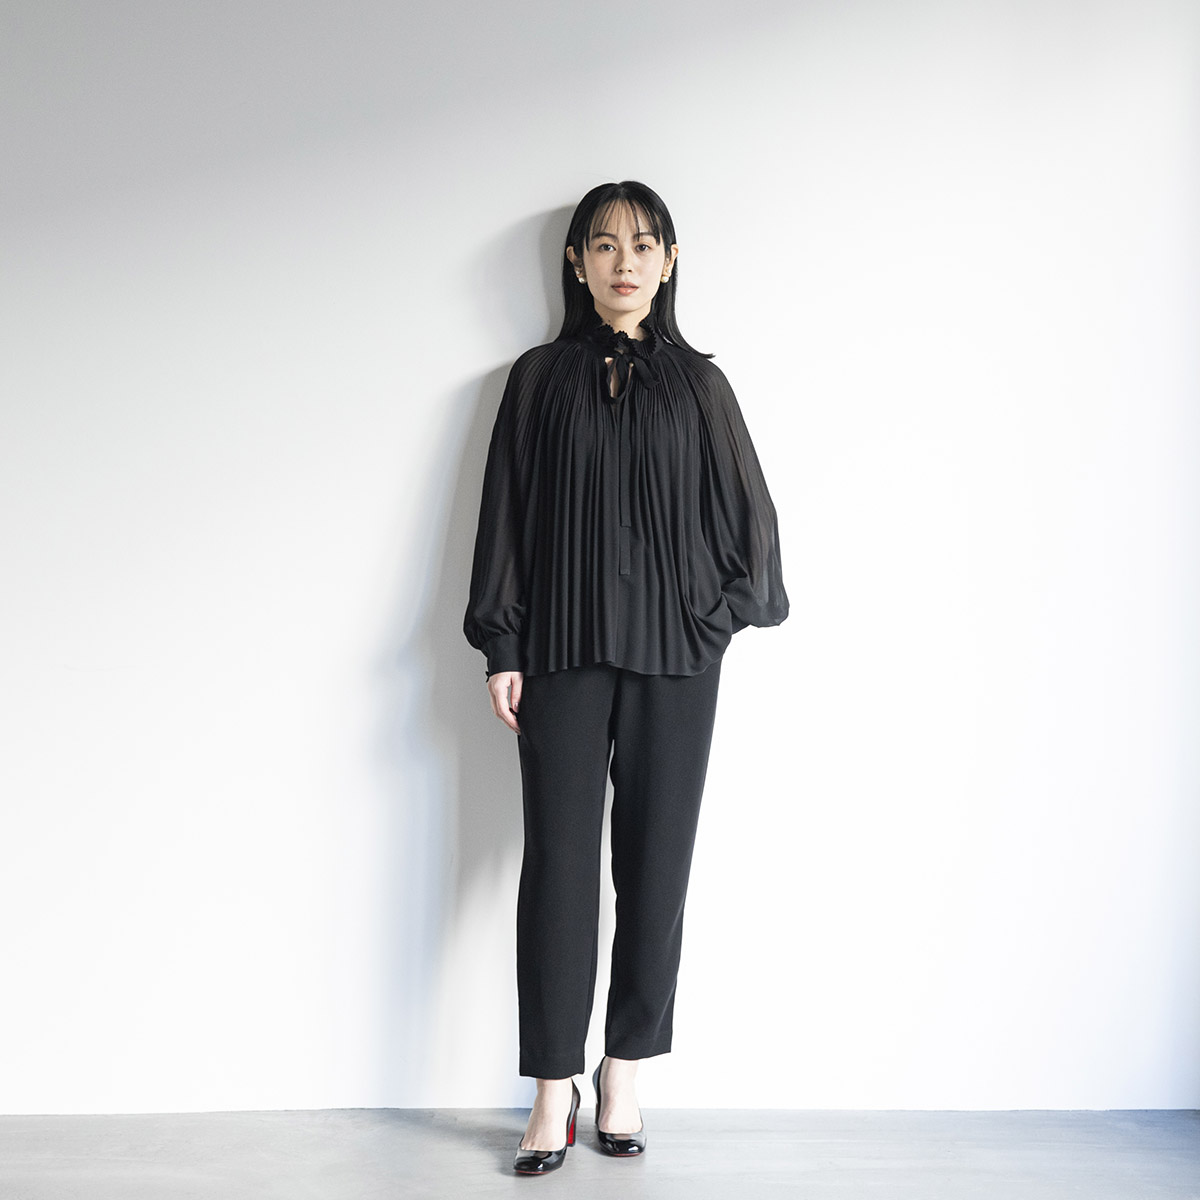 Pleated Frill Blouse - L'UNE - weeksdays